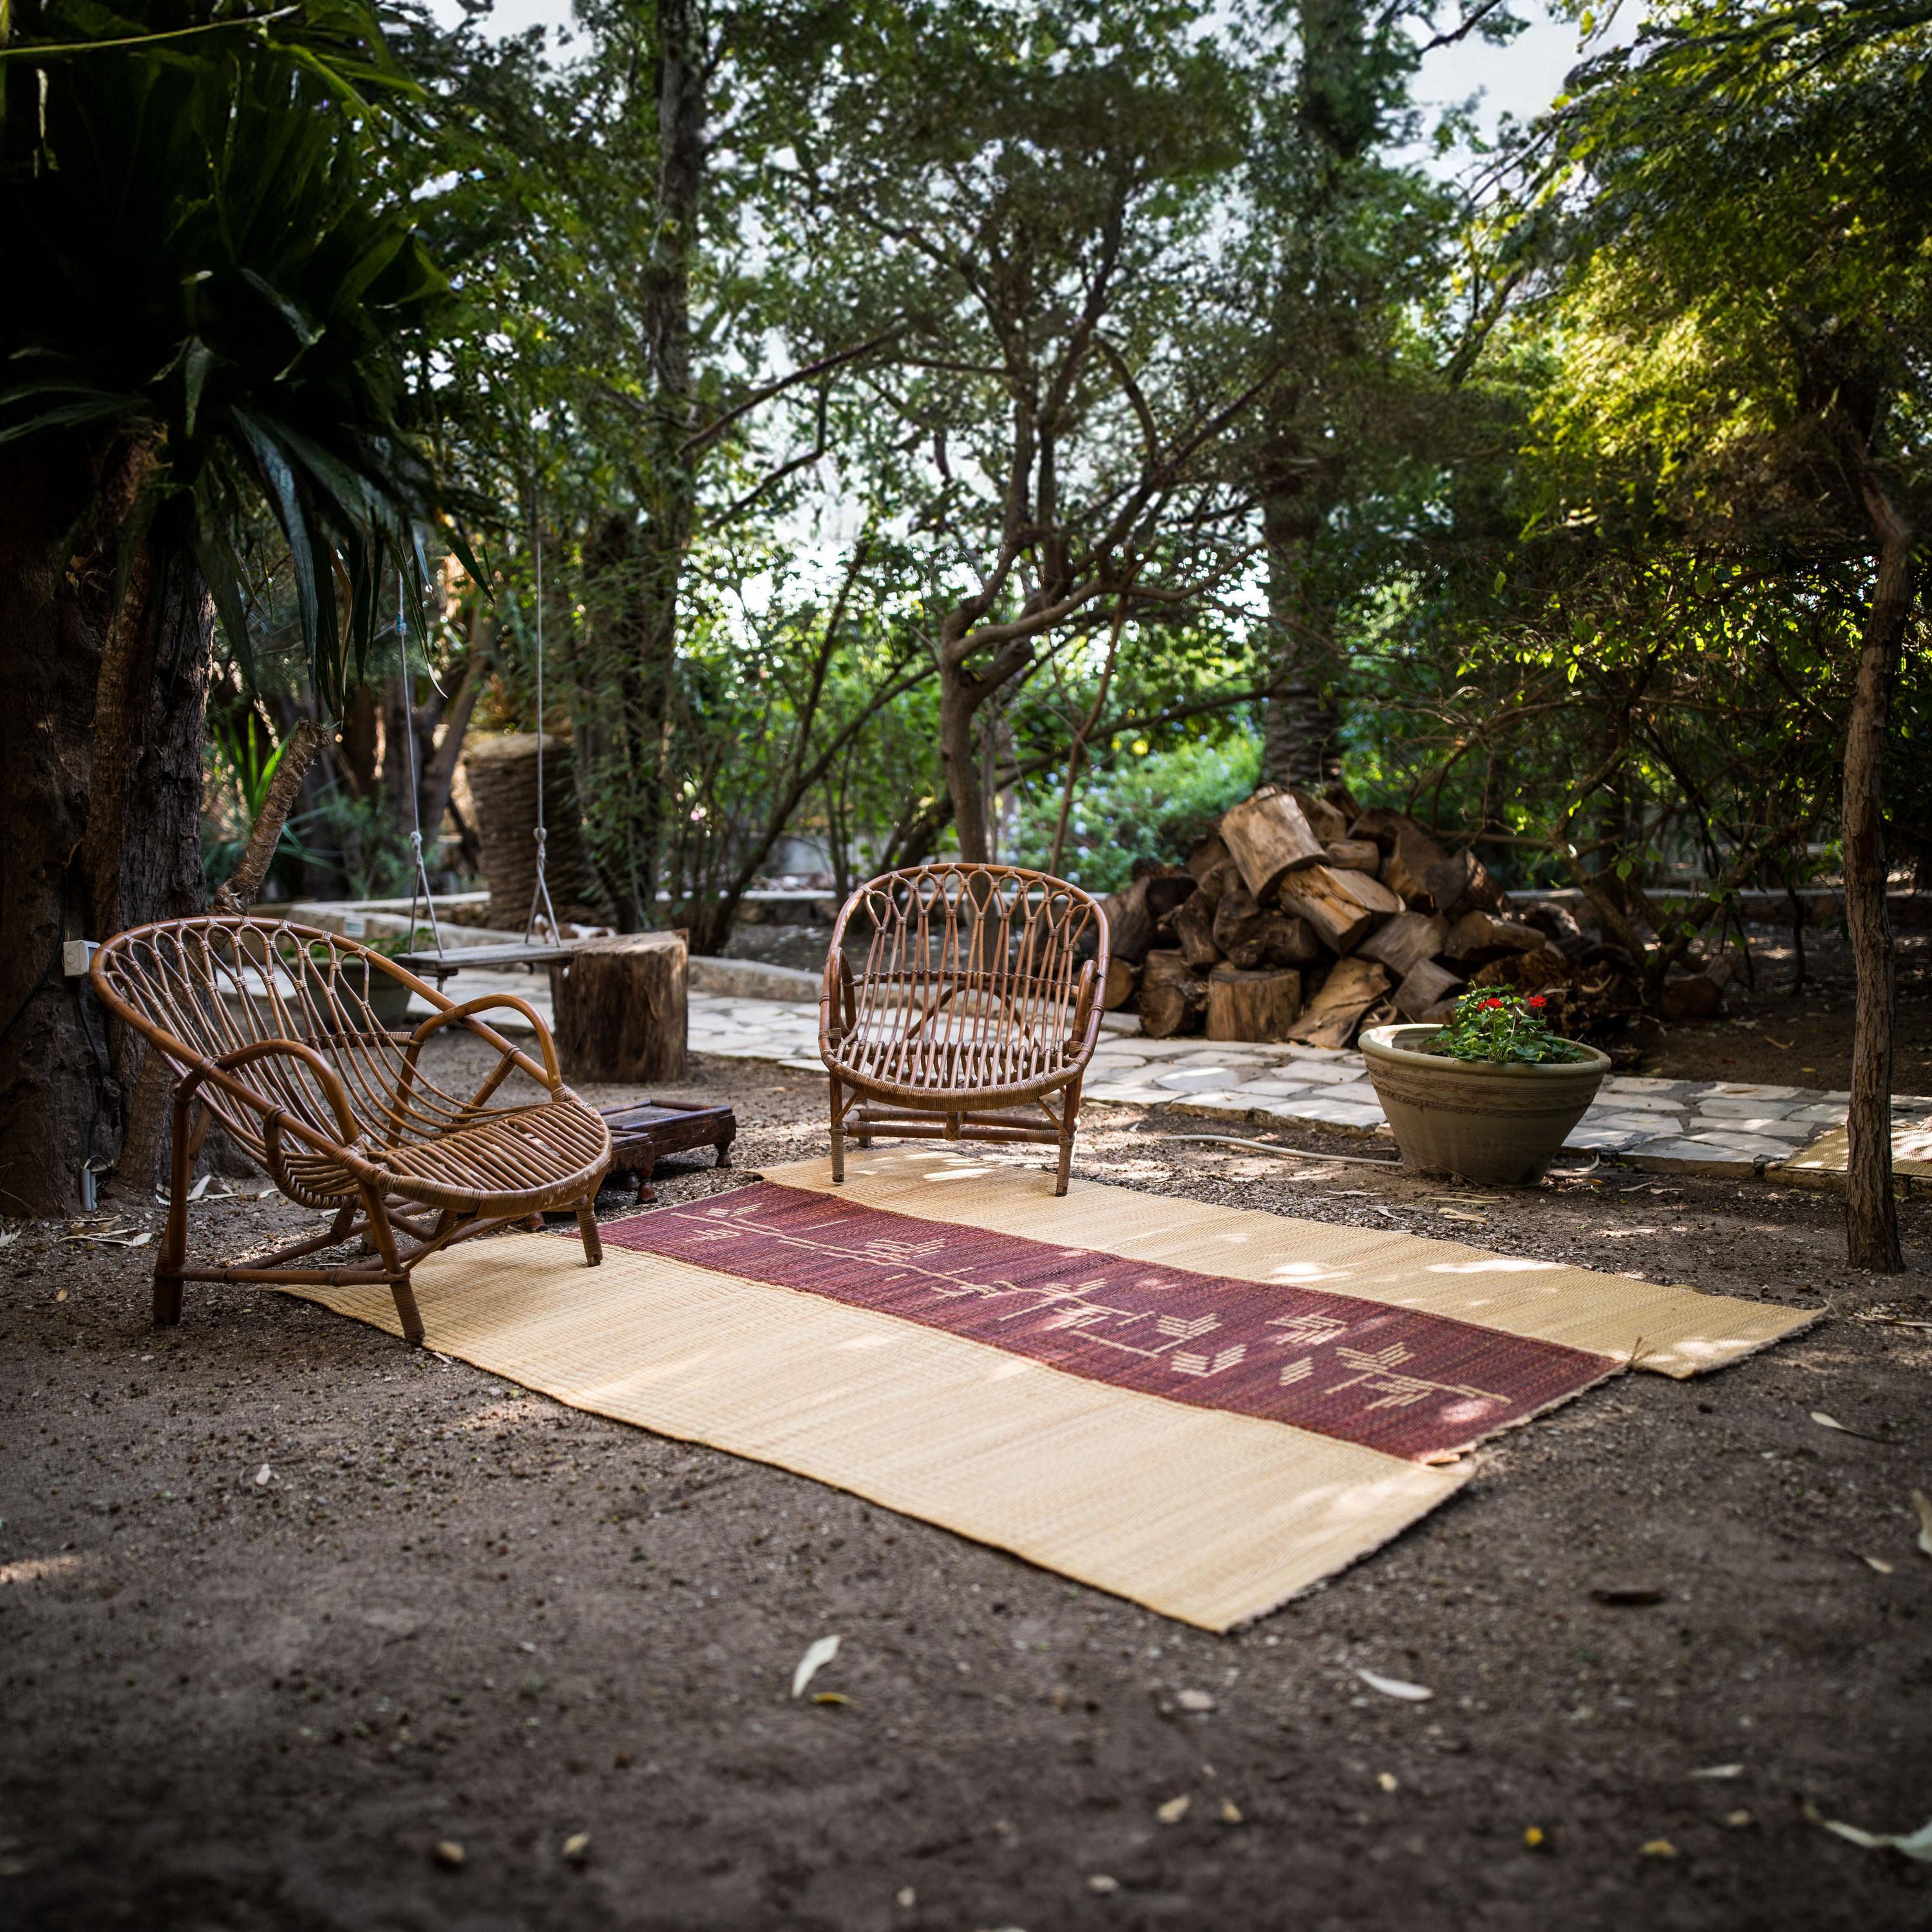 This outdoor rug, through its irregular shape, reflects a new way of assembling mats in 3 staggered bands, and reflects the contribution of design crafts in the art of weaving mats in Smar (sea rush).
This irregularly shaped natural fiber rug